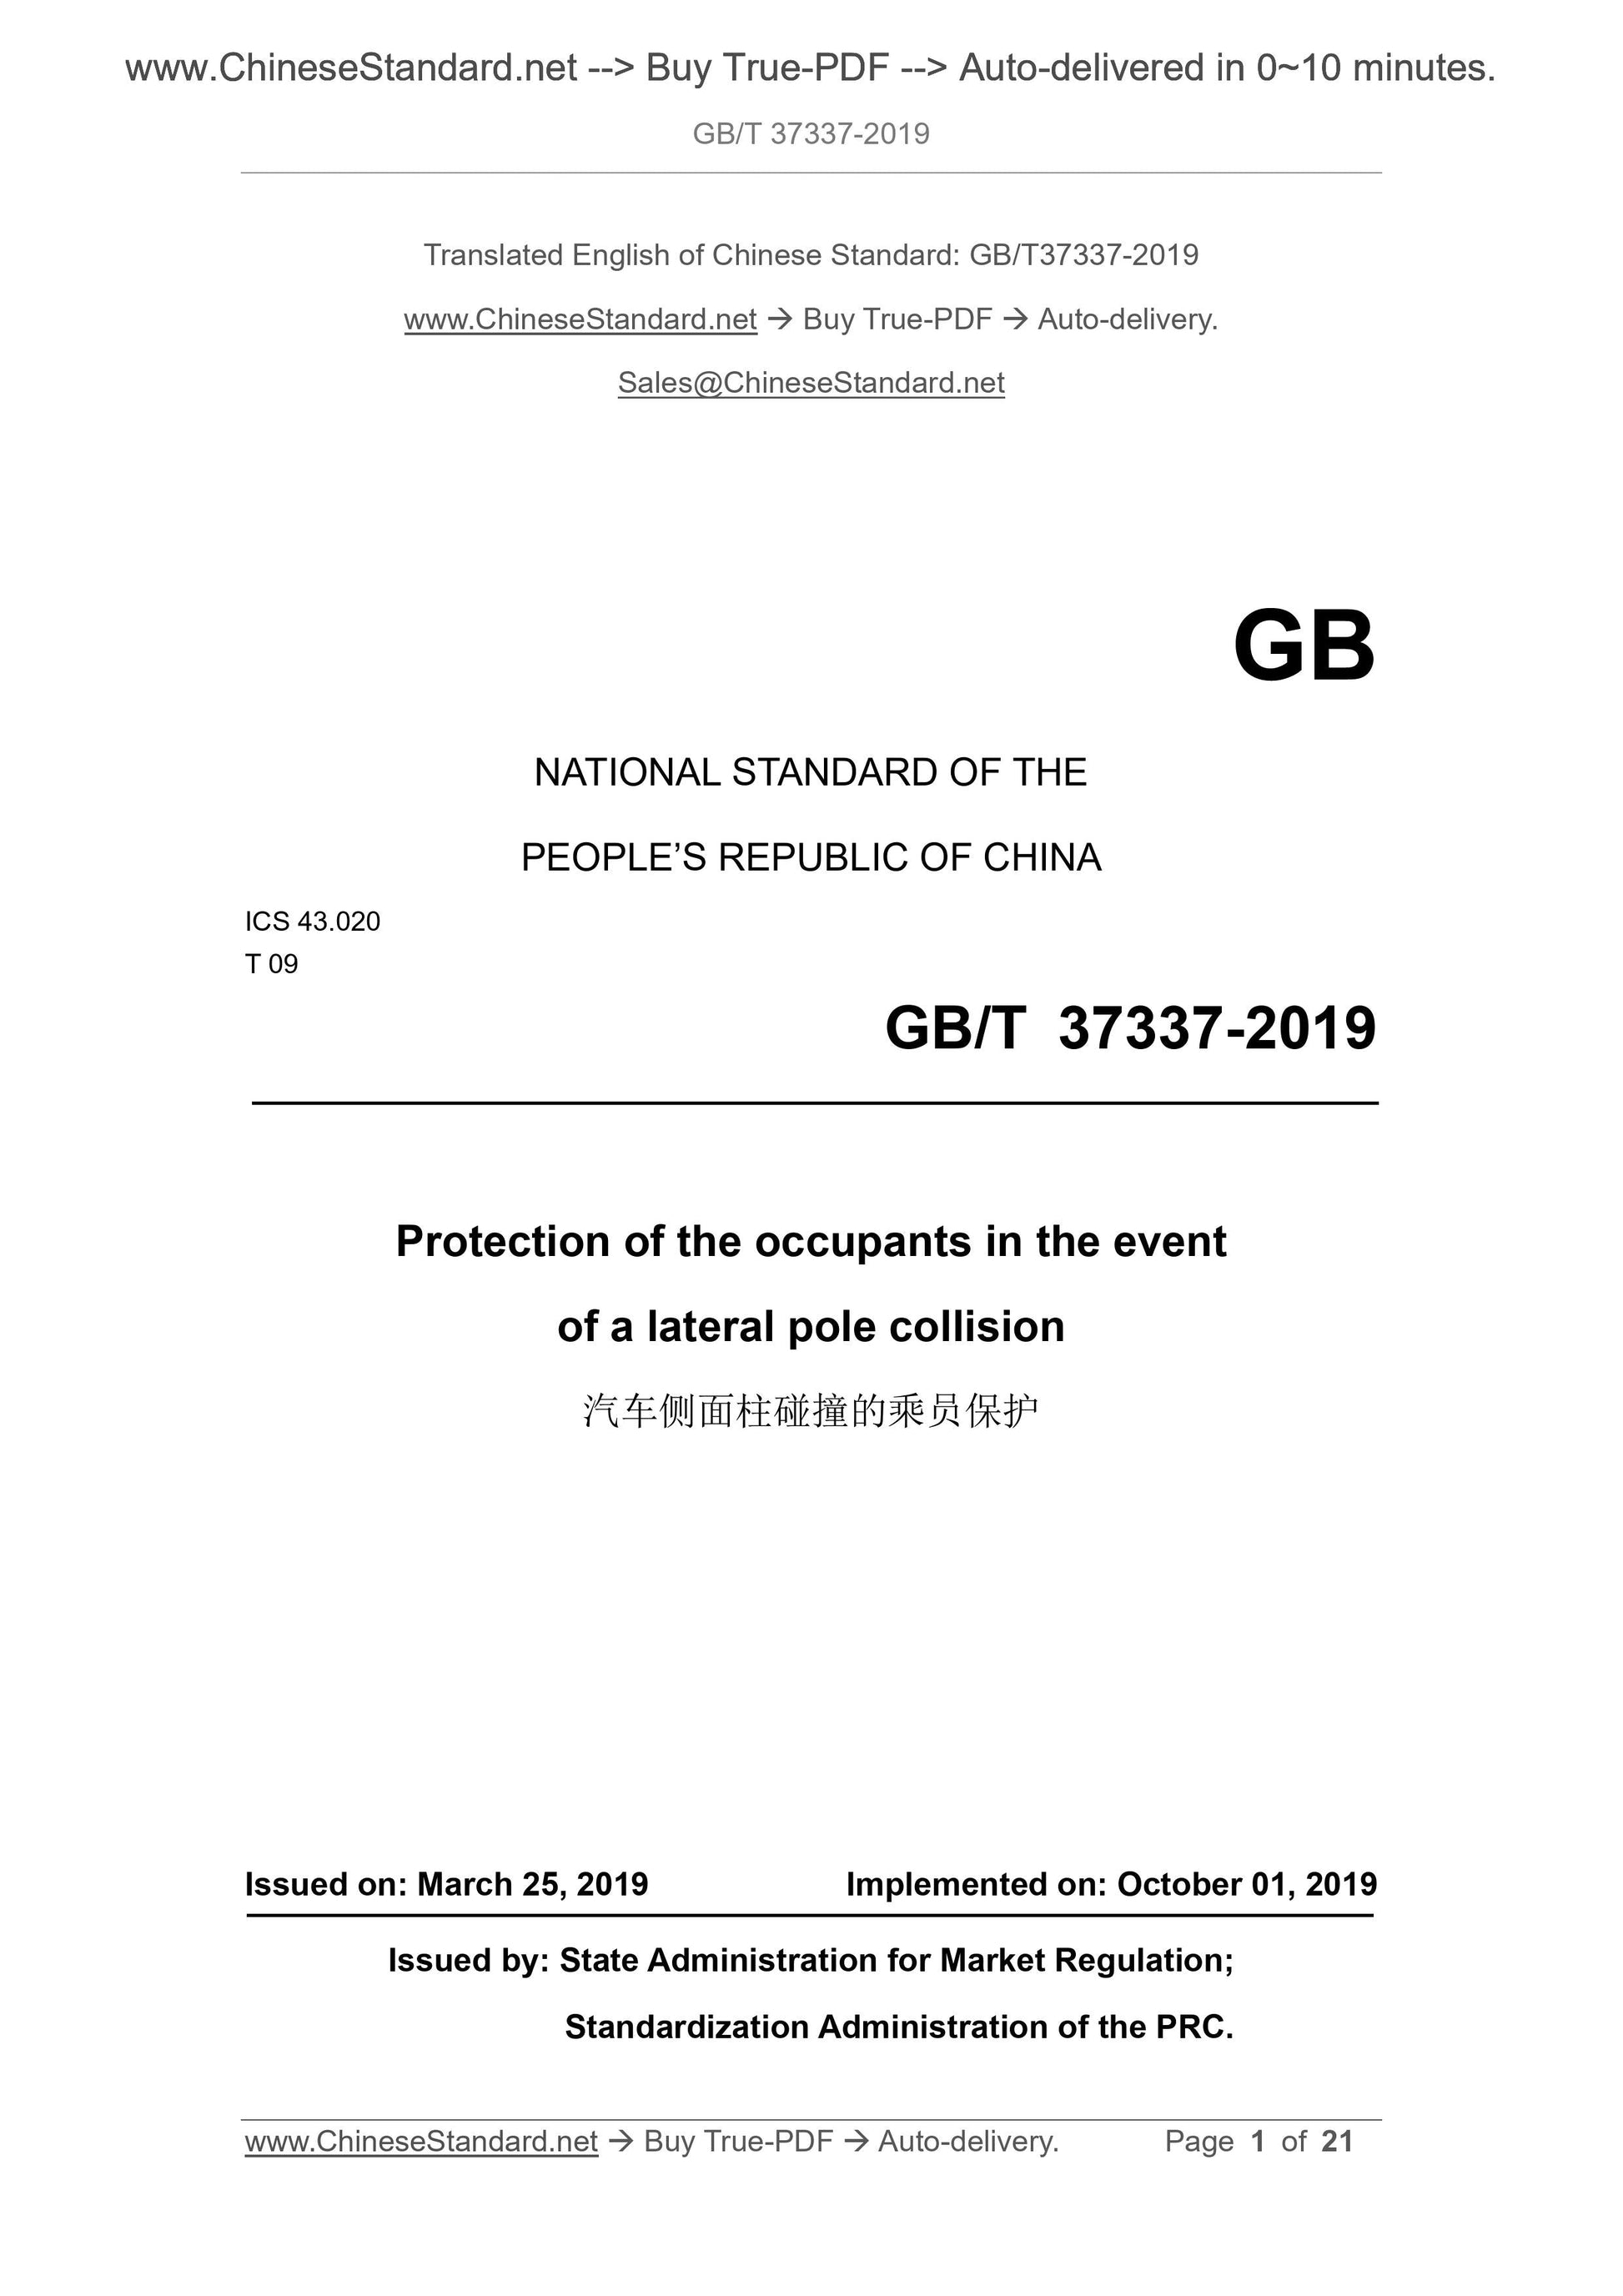 GB/T 37337-2019 Page 1